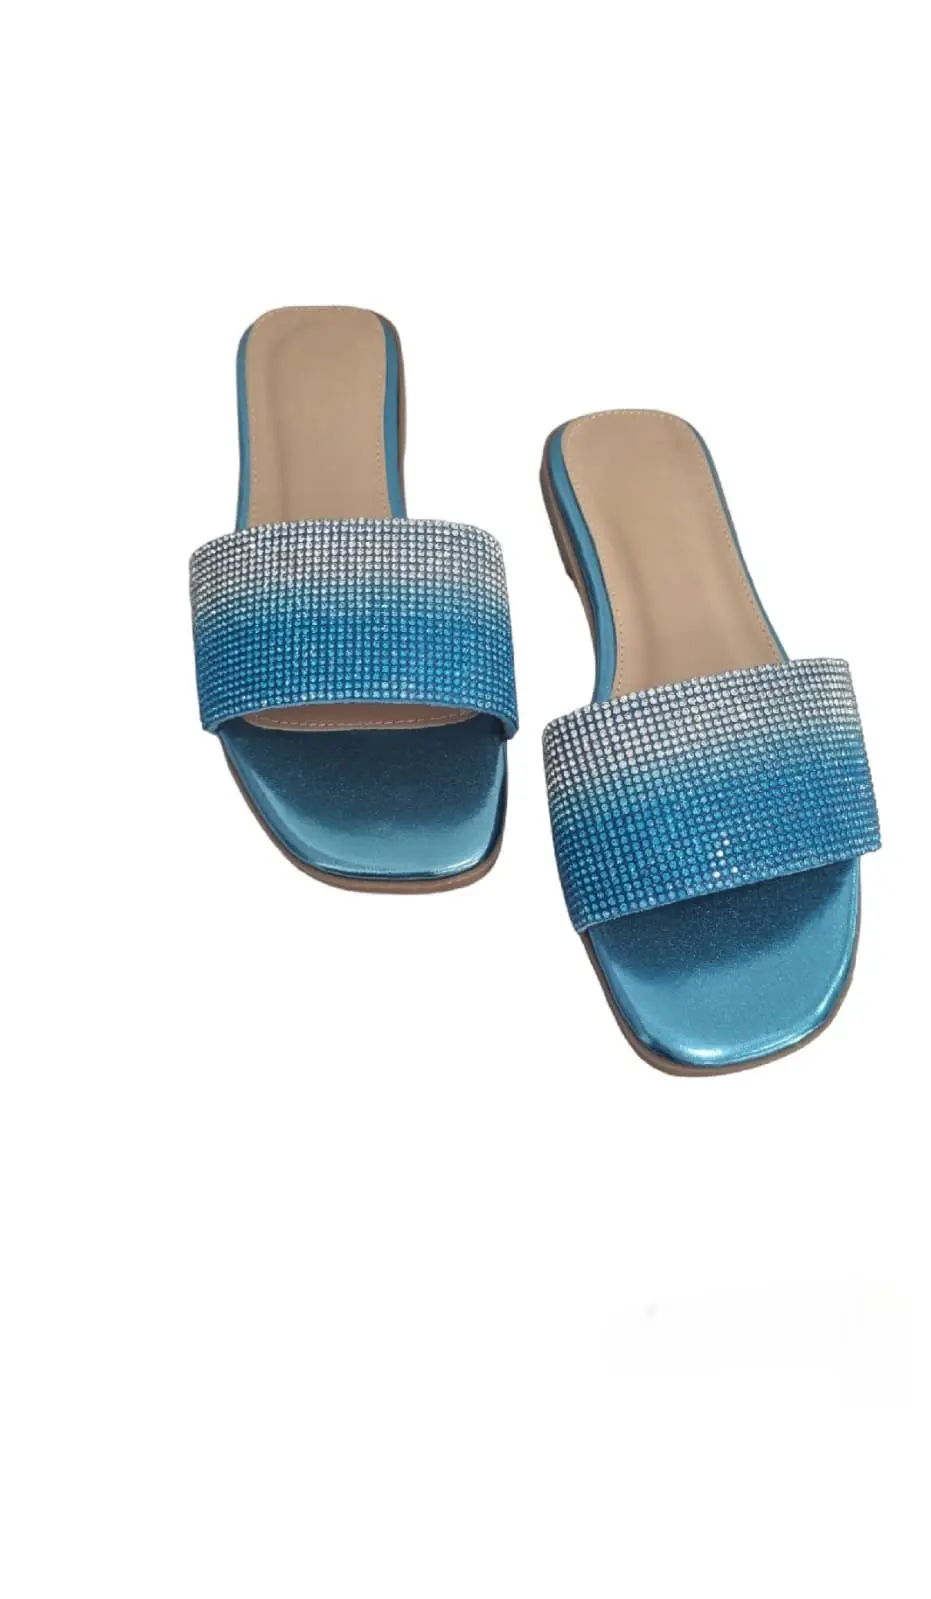 Turquoise slippers with light points, 1.5cm rise, comfort cushion.